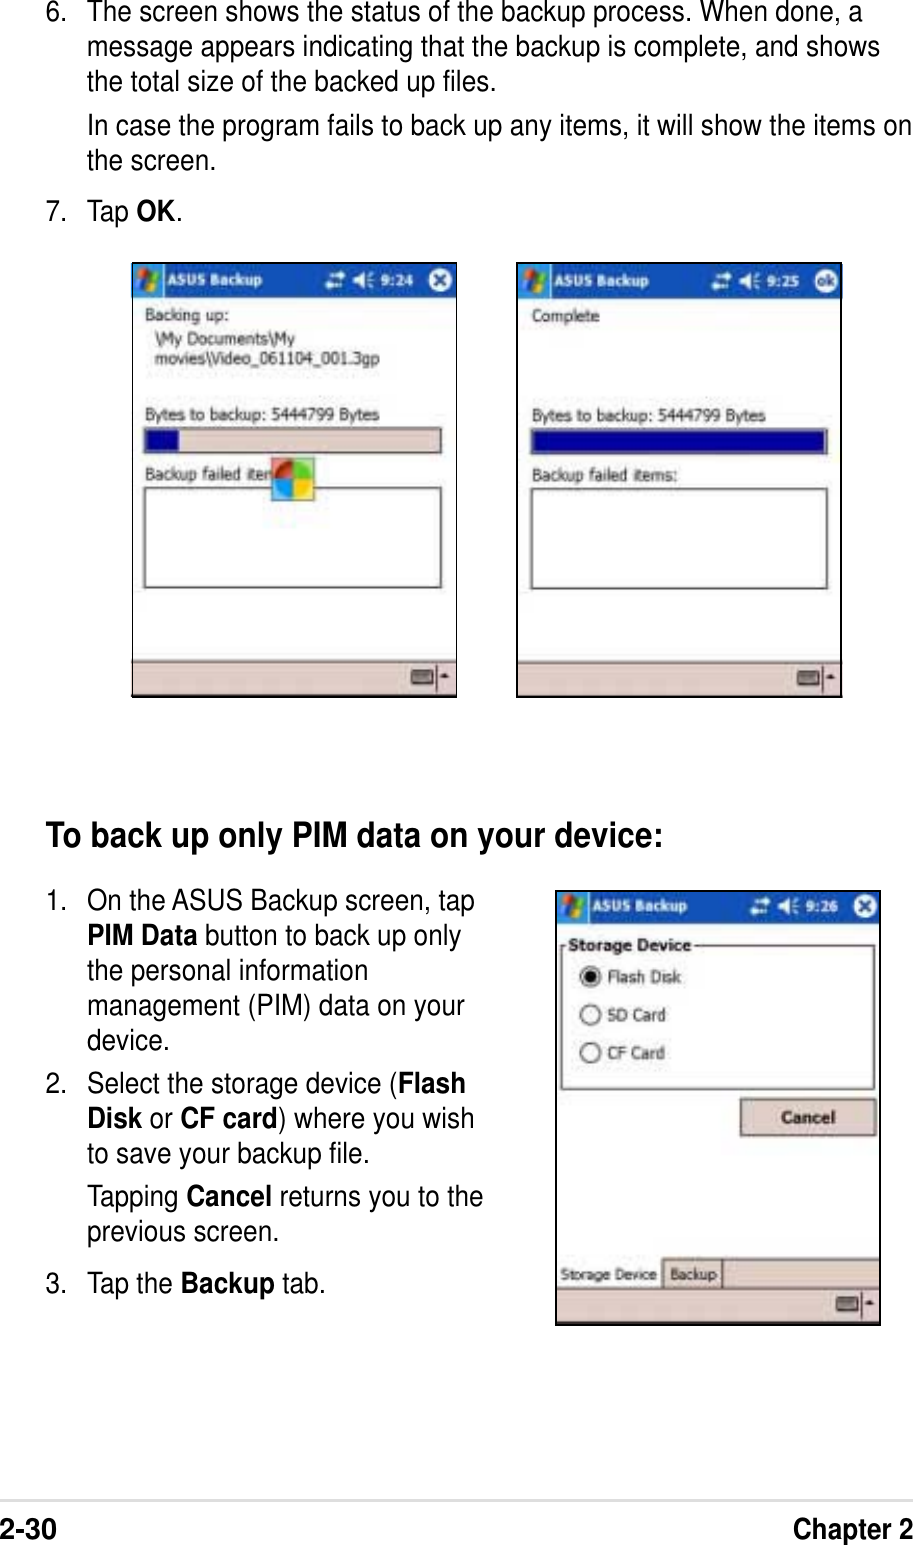 2-30Chapter 26. The screen shows the status of the backup process. When done, amessage appears indicating that the backup is complete, and showsthe total size of the backed up files.In case the program fails to back up any items, it will show the items onthe screen.7. Tap OK.To back up only PIM data on your device:1. On the ASUS Backup screen, tapPIM Data button to back up onlythe personal informationmanagement (PIM) data on yourdevice.2. Select the storage device (FlashDisk or CF card) where you wishto save your backup file.Tapping Cancel returns you to theprevious screen.3. Tap the Backup tab.